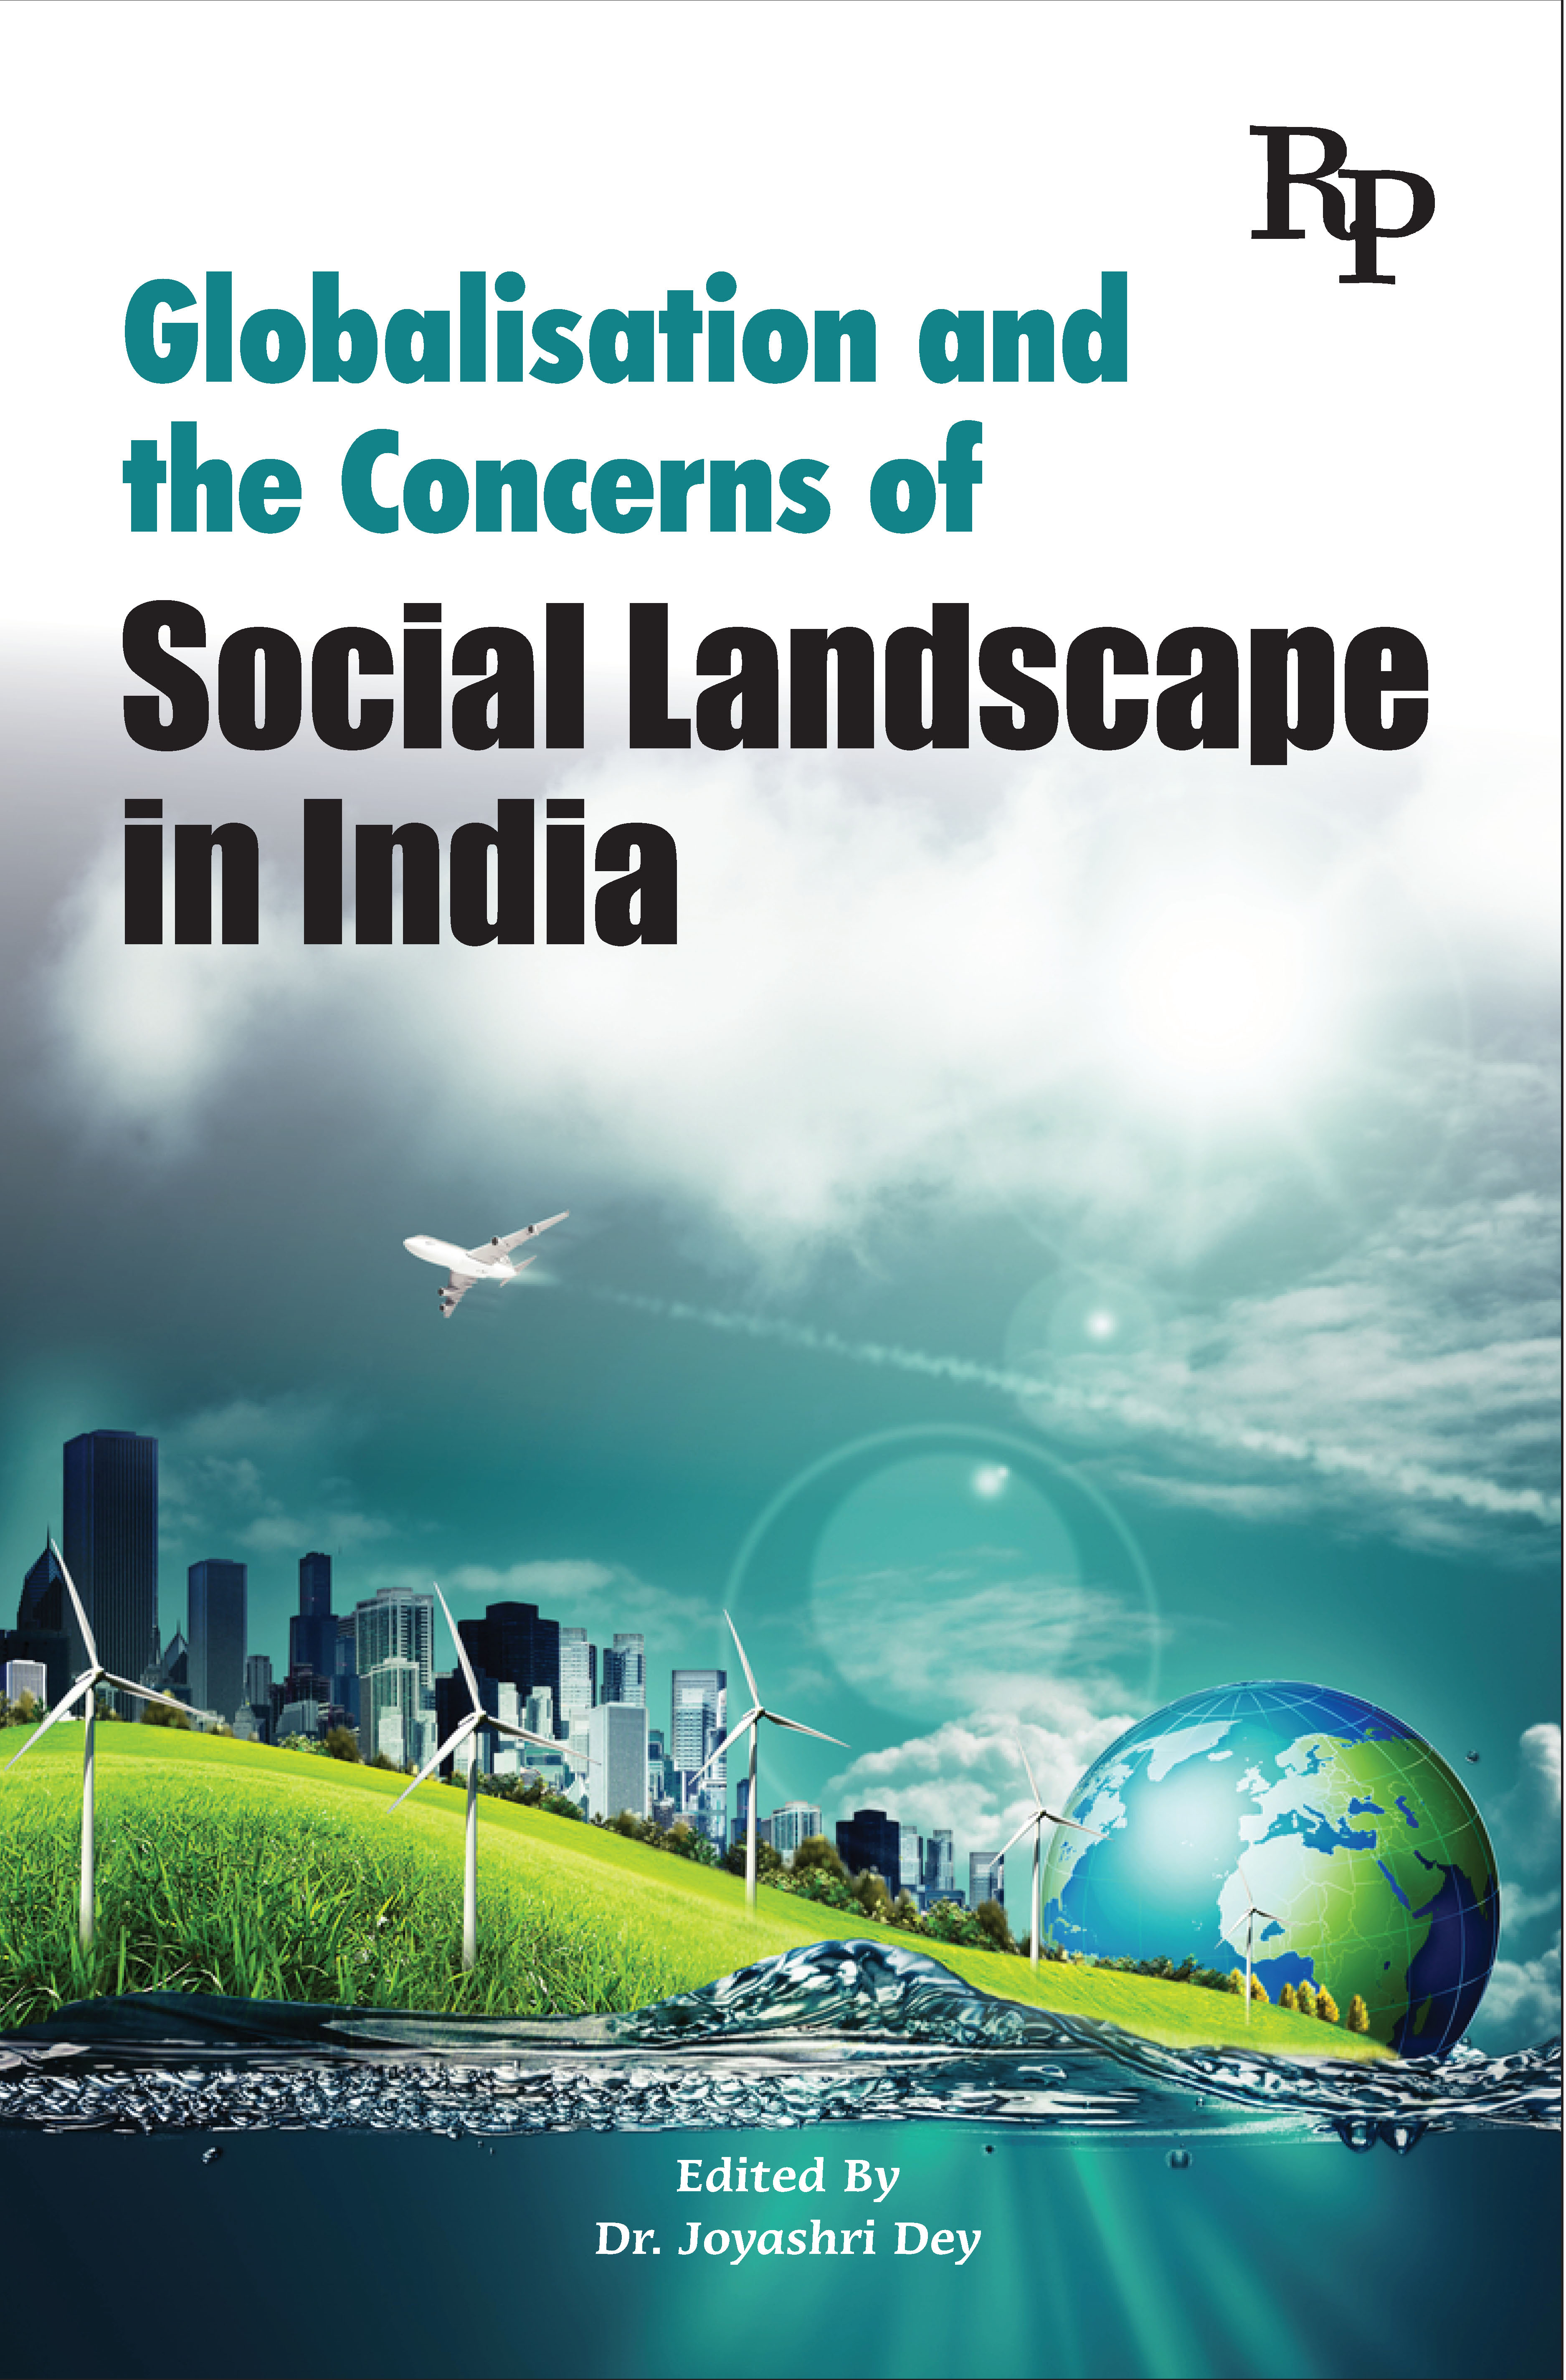 Globalisation and the Concerns of Social Landscape in India